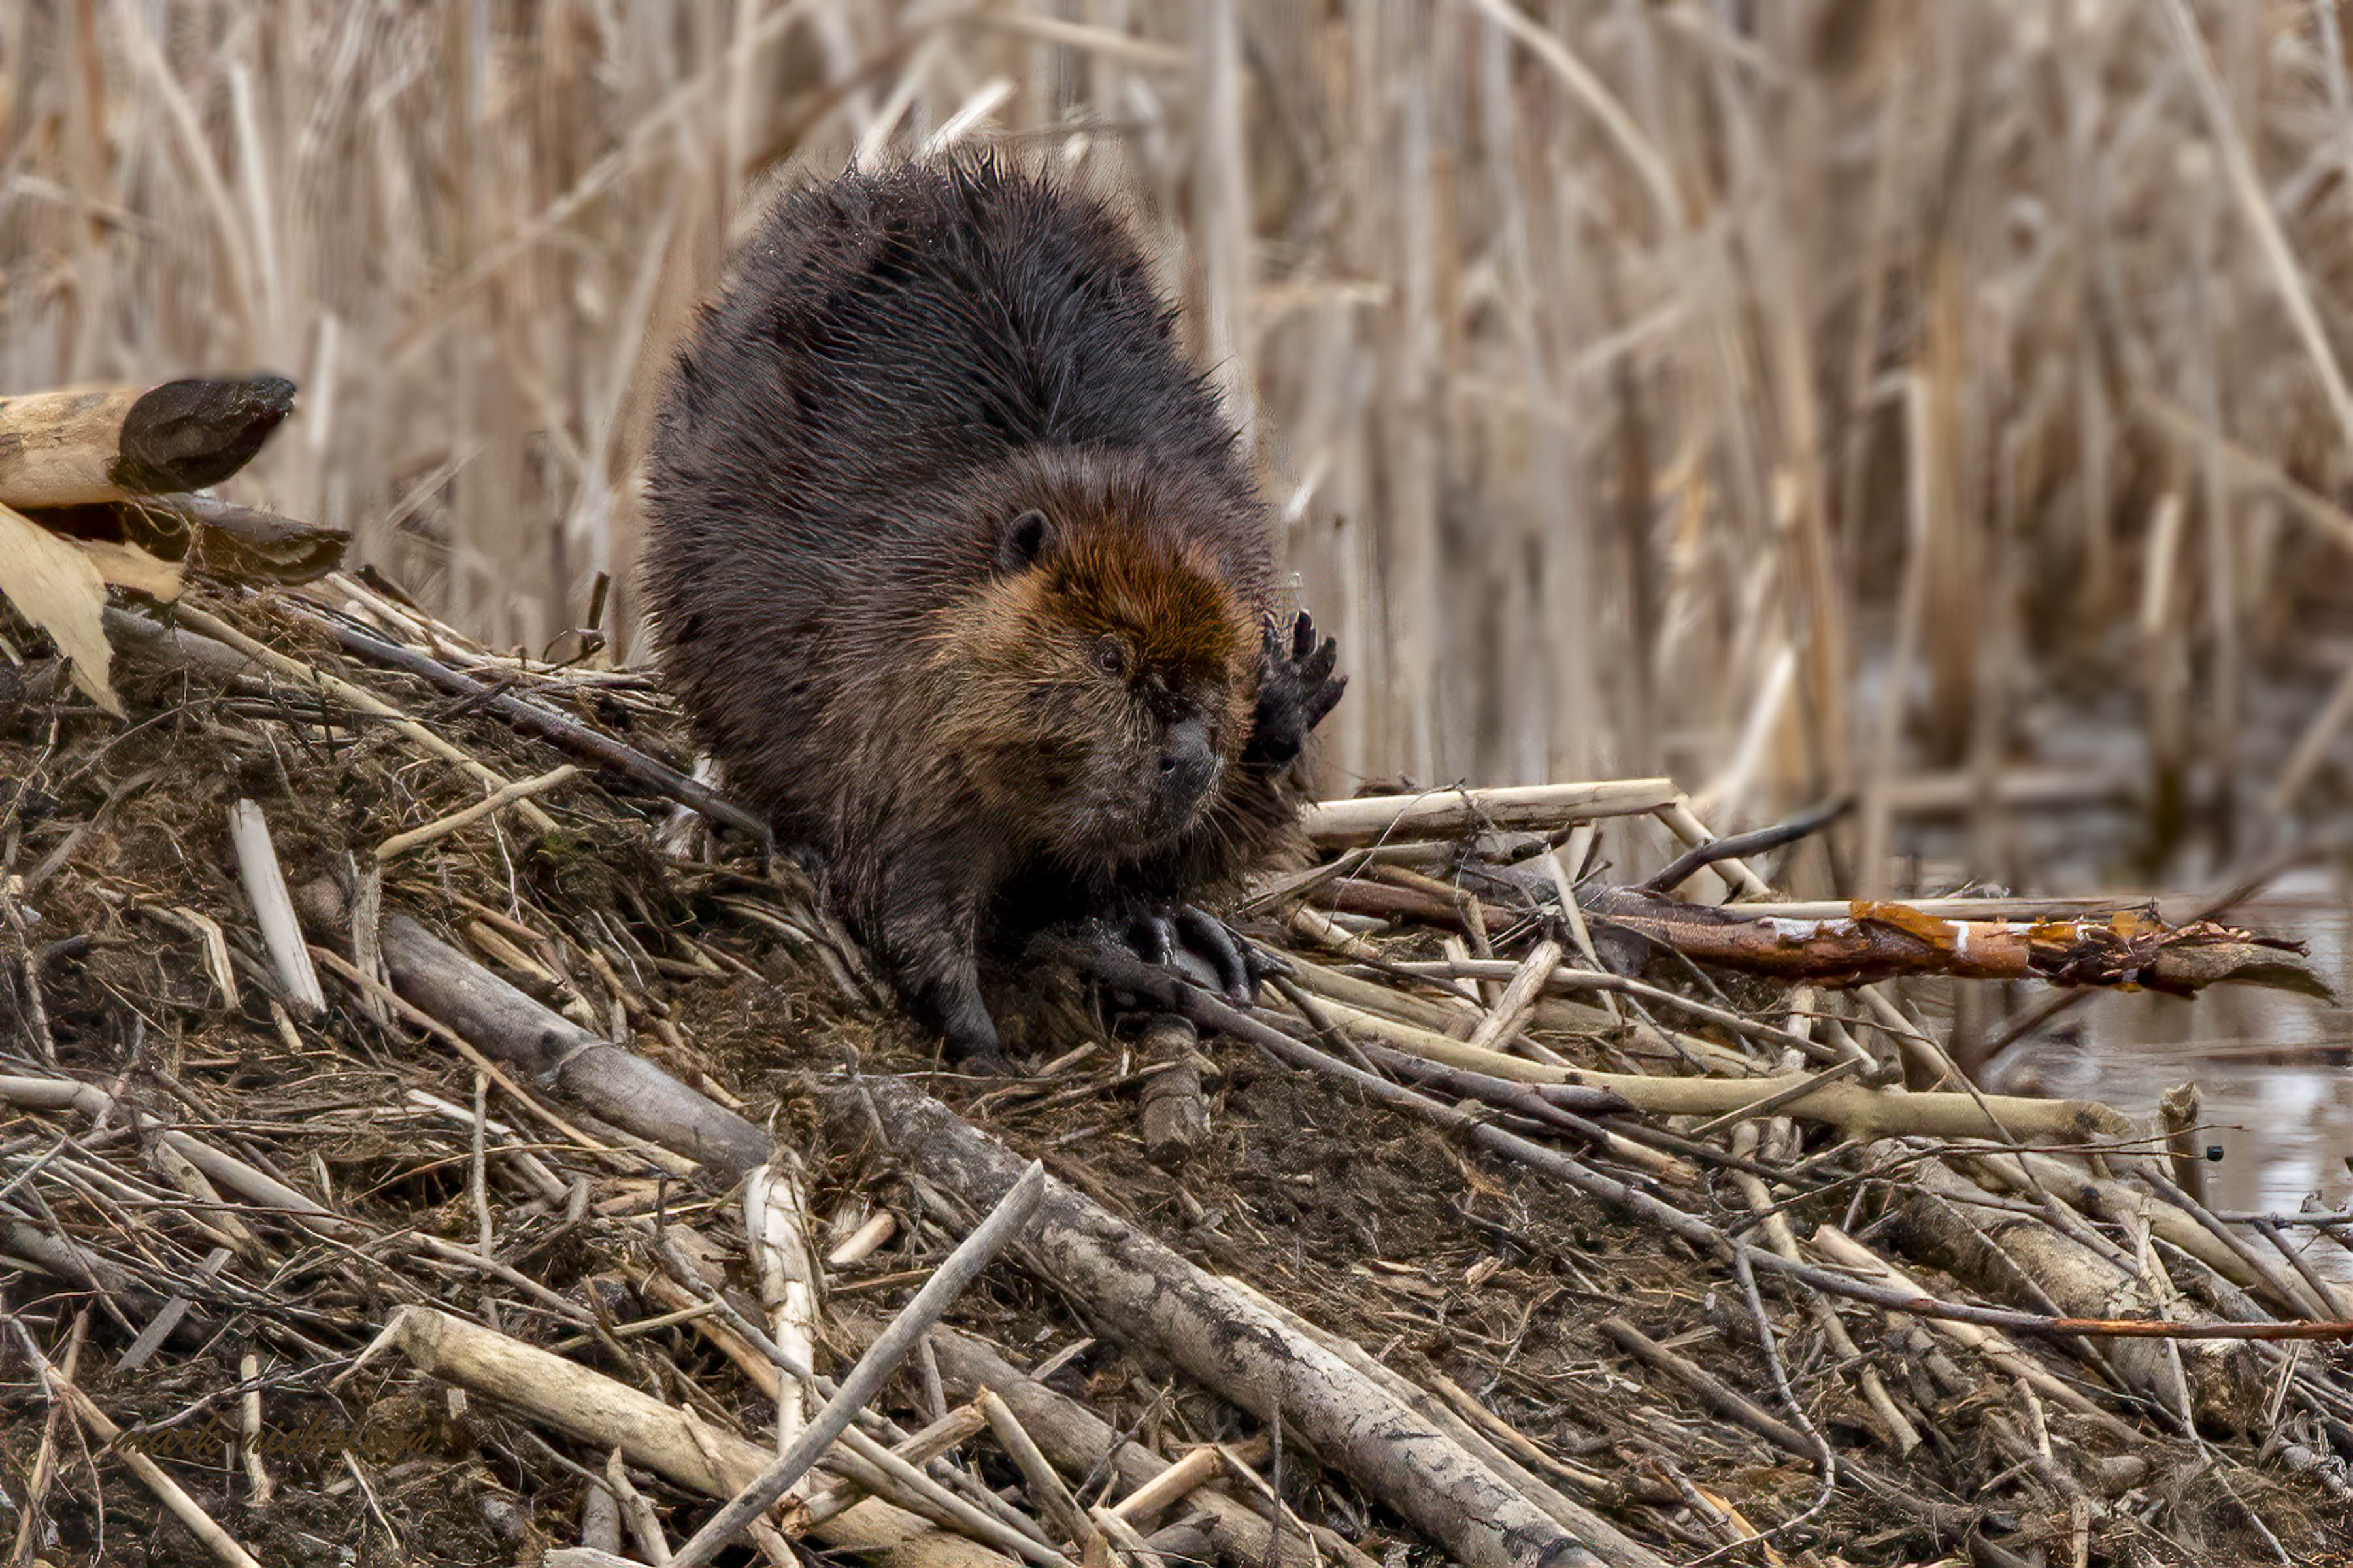 Dark brown beaver perched on a beaver lodge made of small to large sticks with chewed ends. The beaver is grooming itself with its left paw with tan dead cattails in the background.